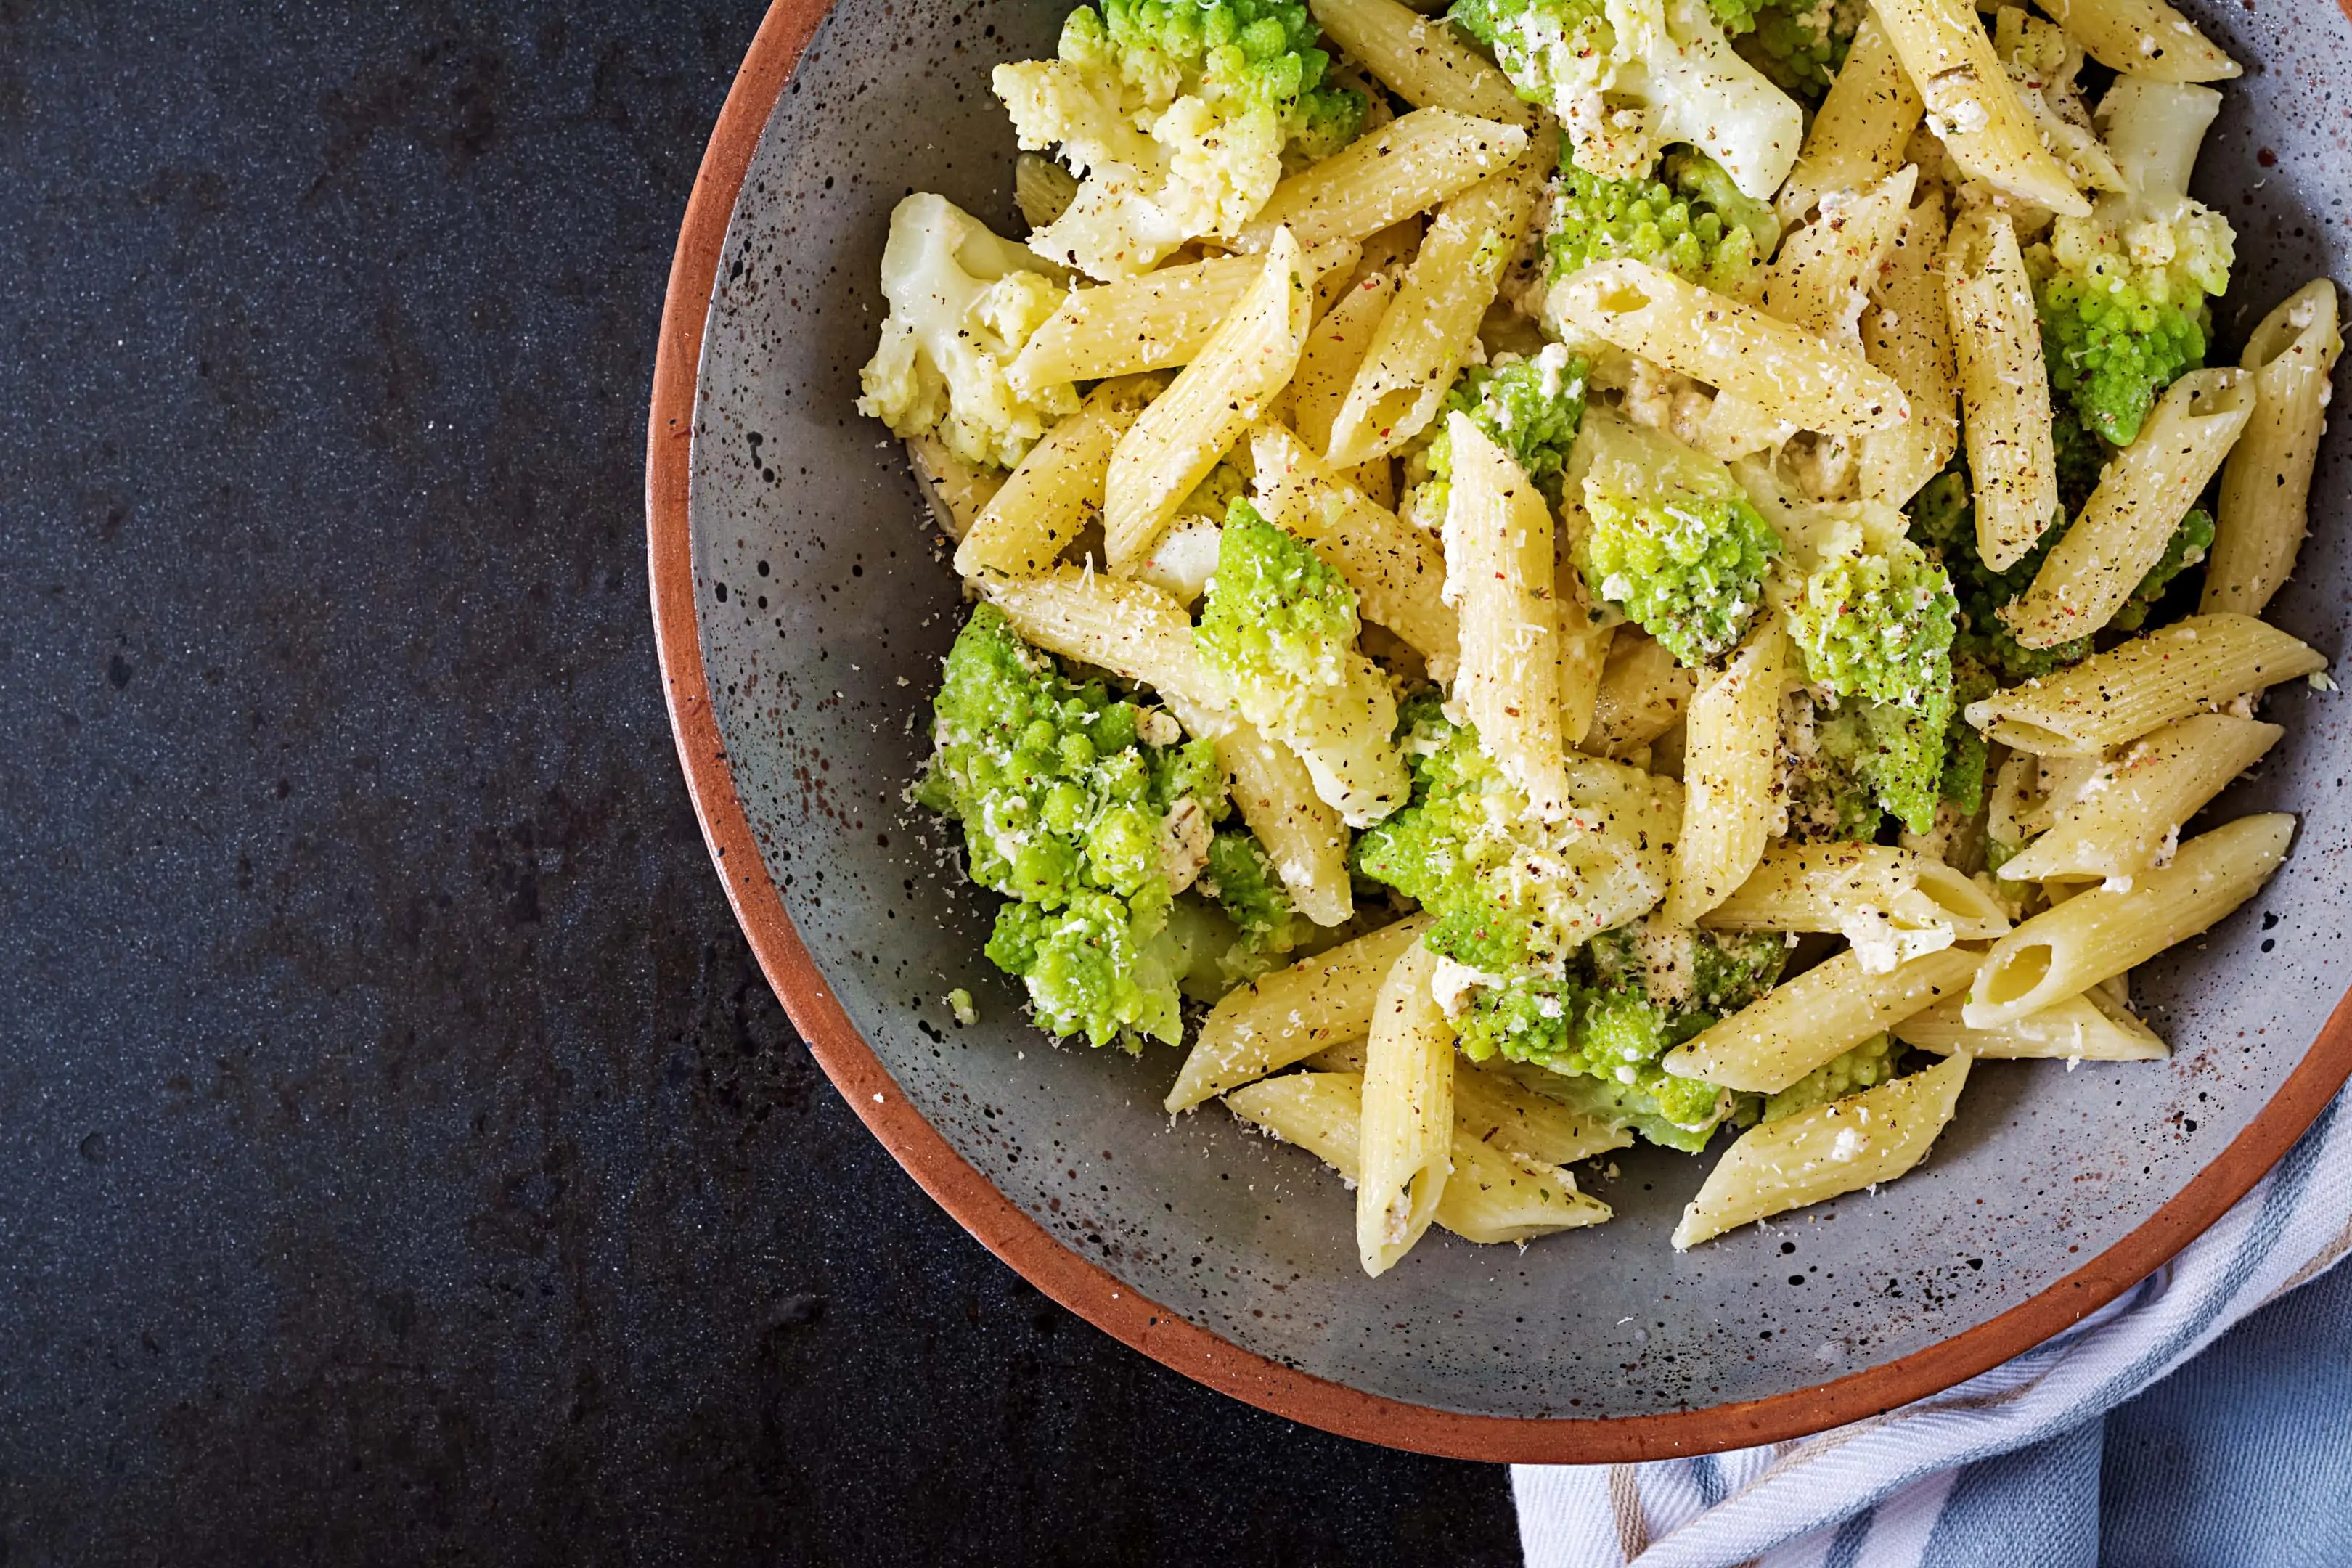 Penne pasta with Romanesco in a plate